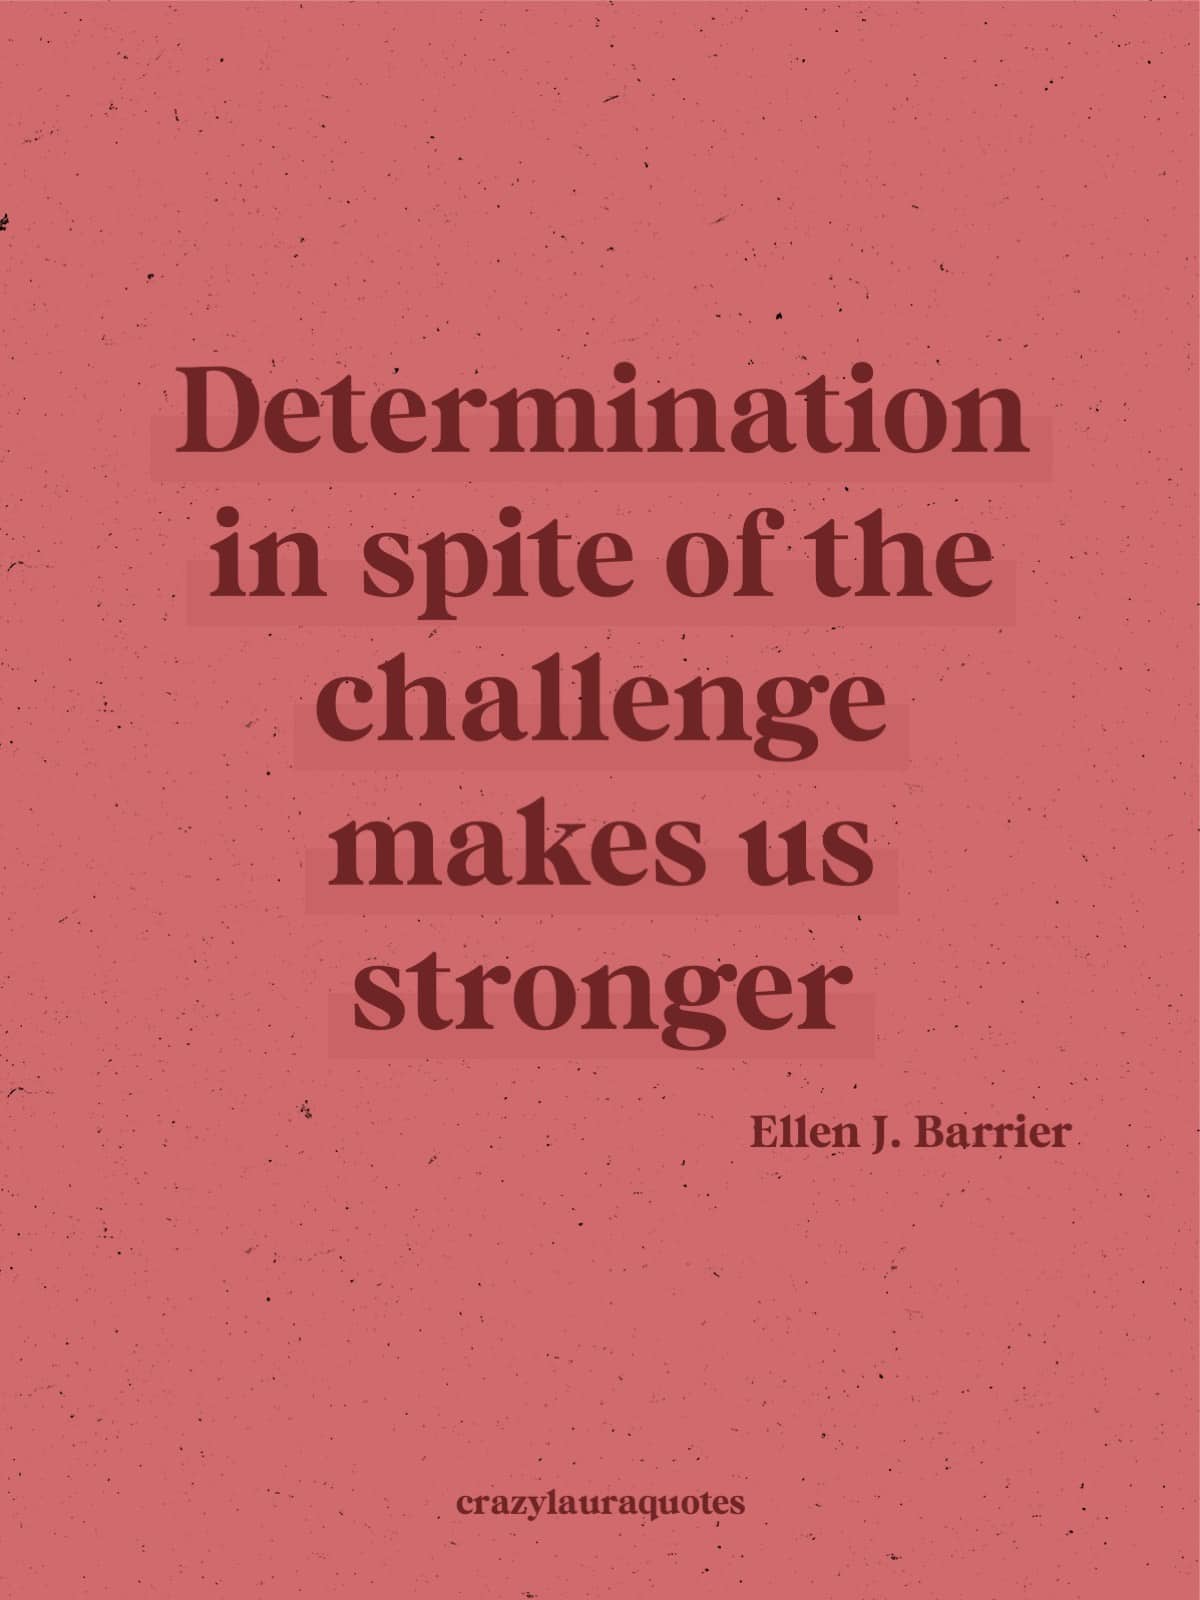 determination and strength quote